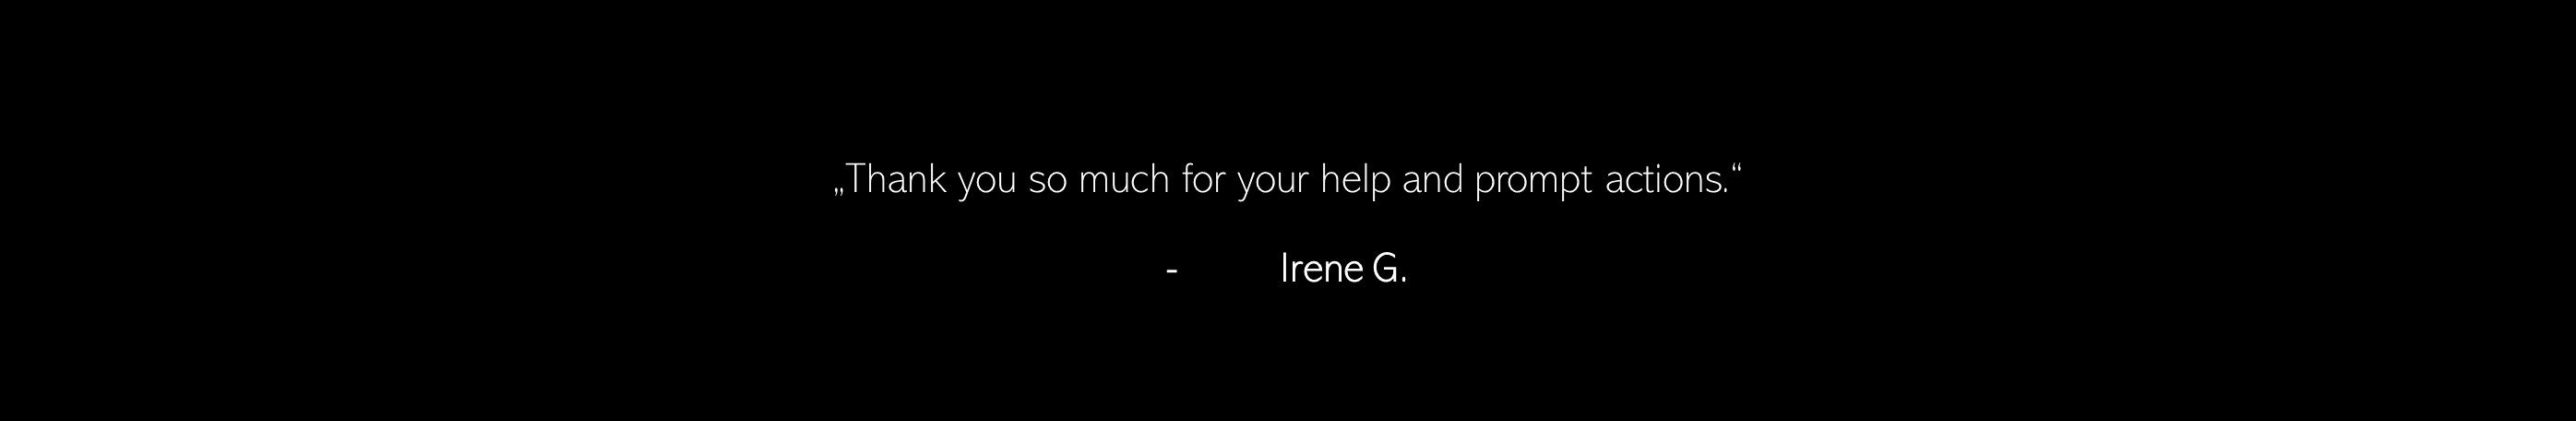 Thank you so much for your help and prompt actions. - Irene G.